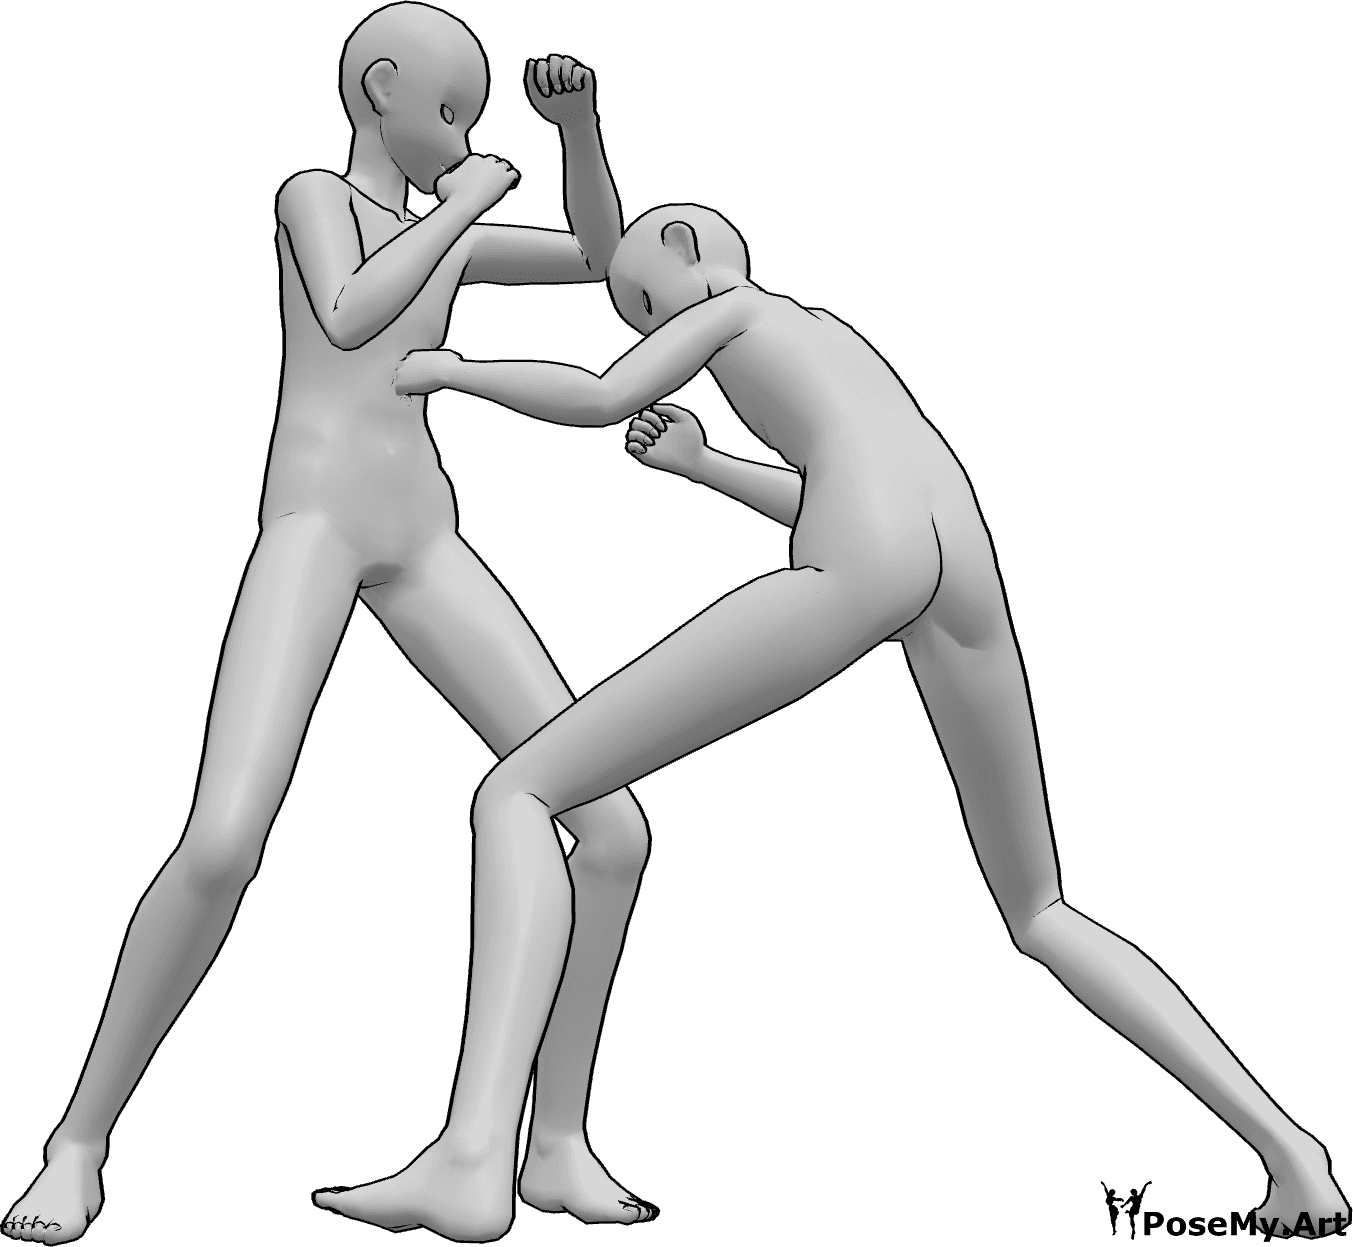 Pose Reference- Anime male fighting pose - Two anime males are fighting, punching, hitting each other, anime battle pose